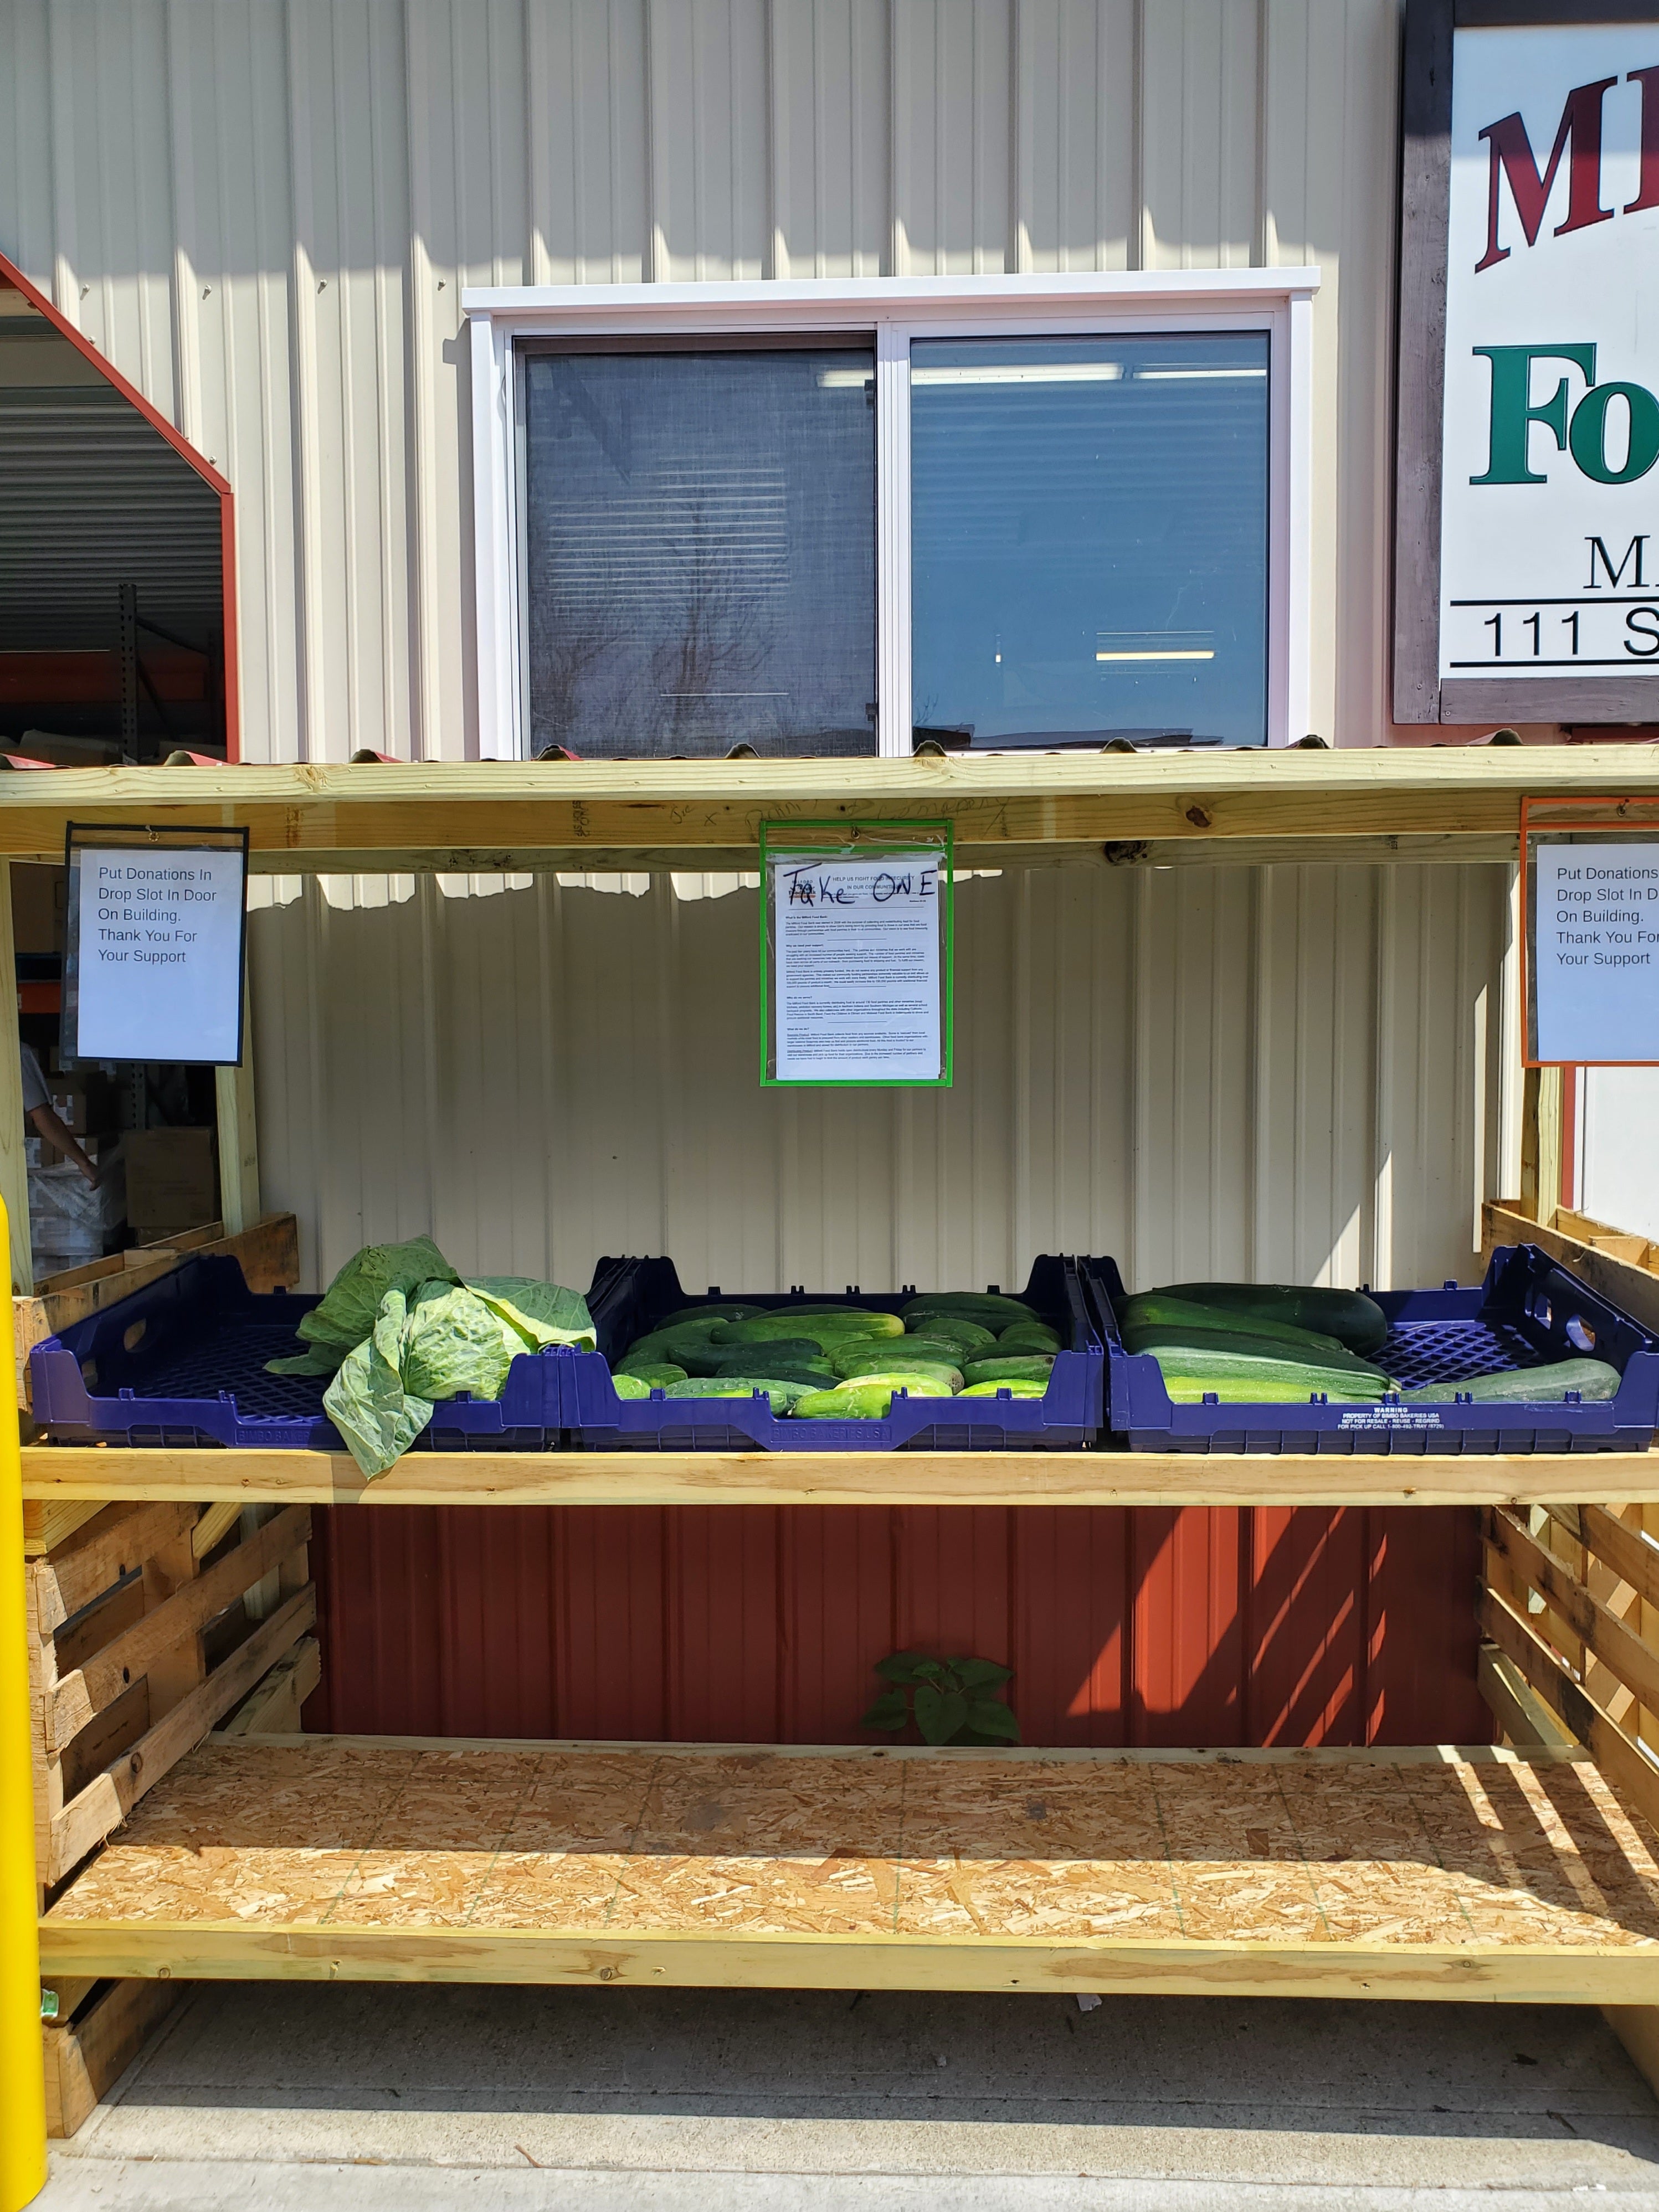 A free-for-the-taking produce stand sits in front of Milford Food Bank